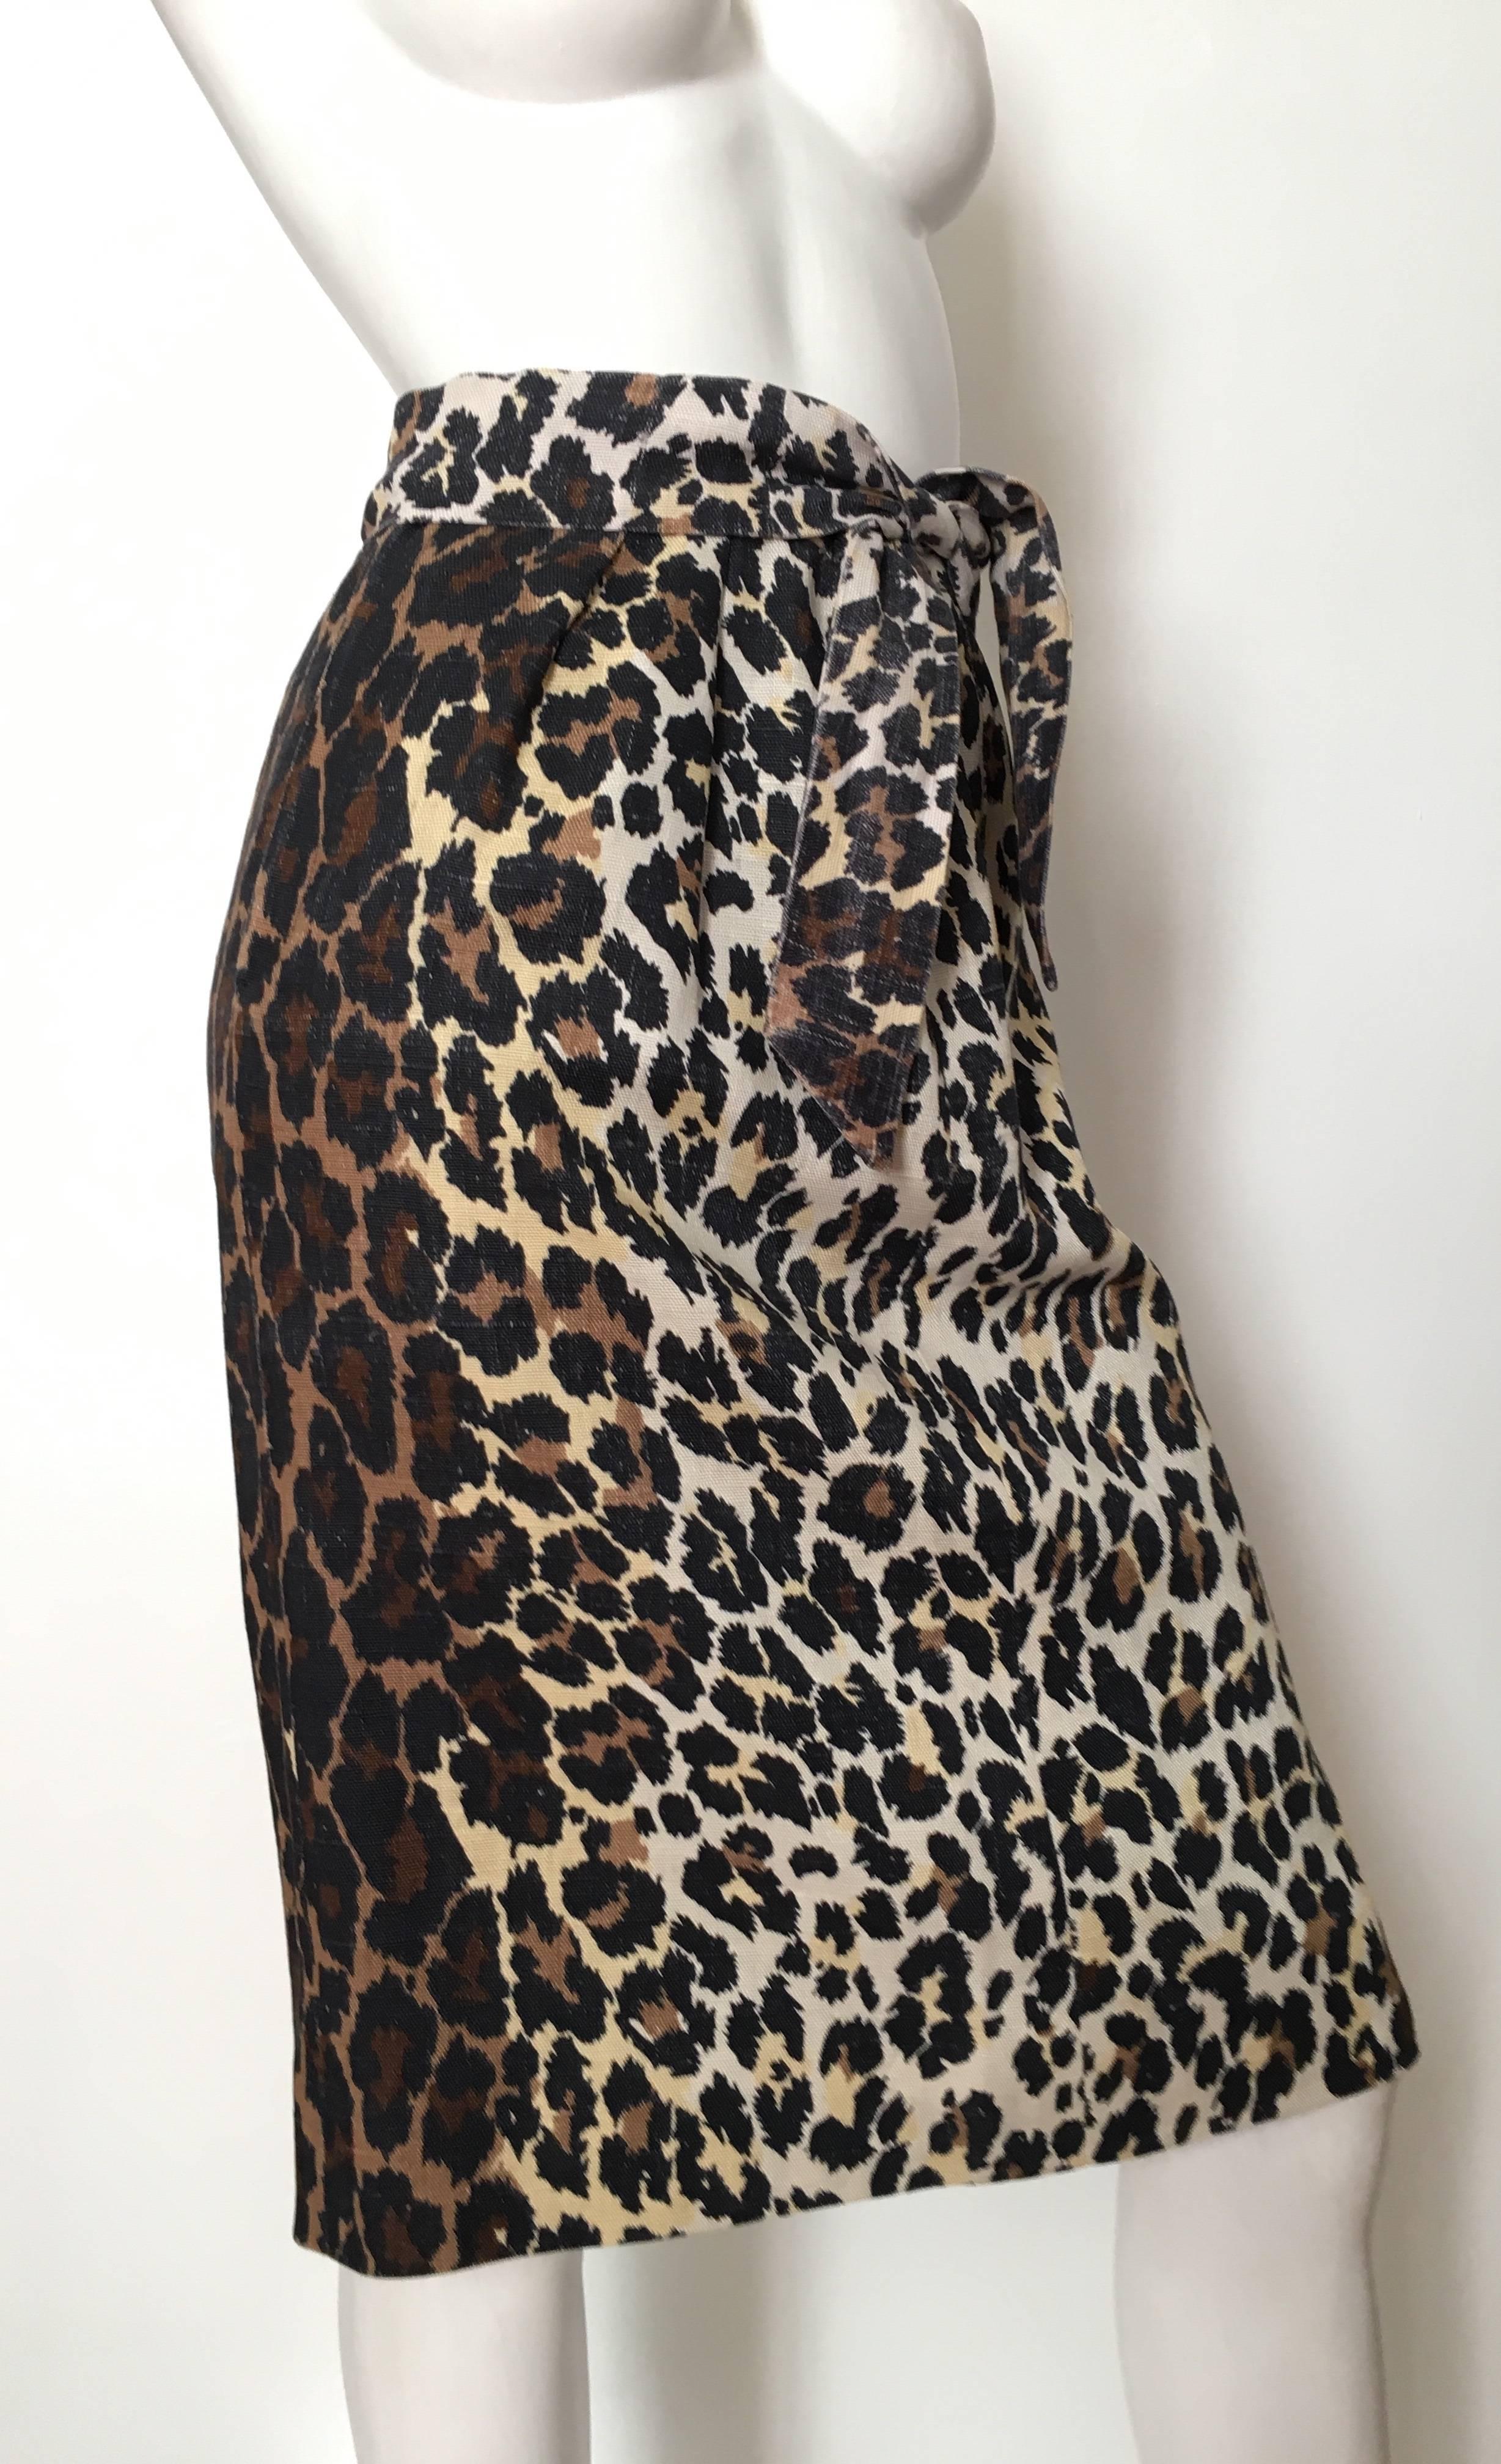 Blassport by Bill Blass 1980s linen cheetah print skirt with 2 tie belts is a vintage size 6 but fits like a modern USA size 4.  Ladies please grab your measuring tape so you can properly measure your waistline and hips to make certain this will fit